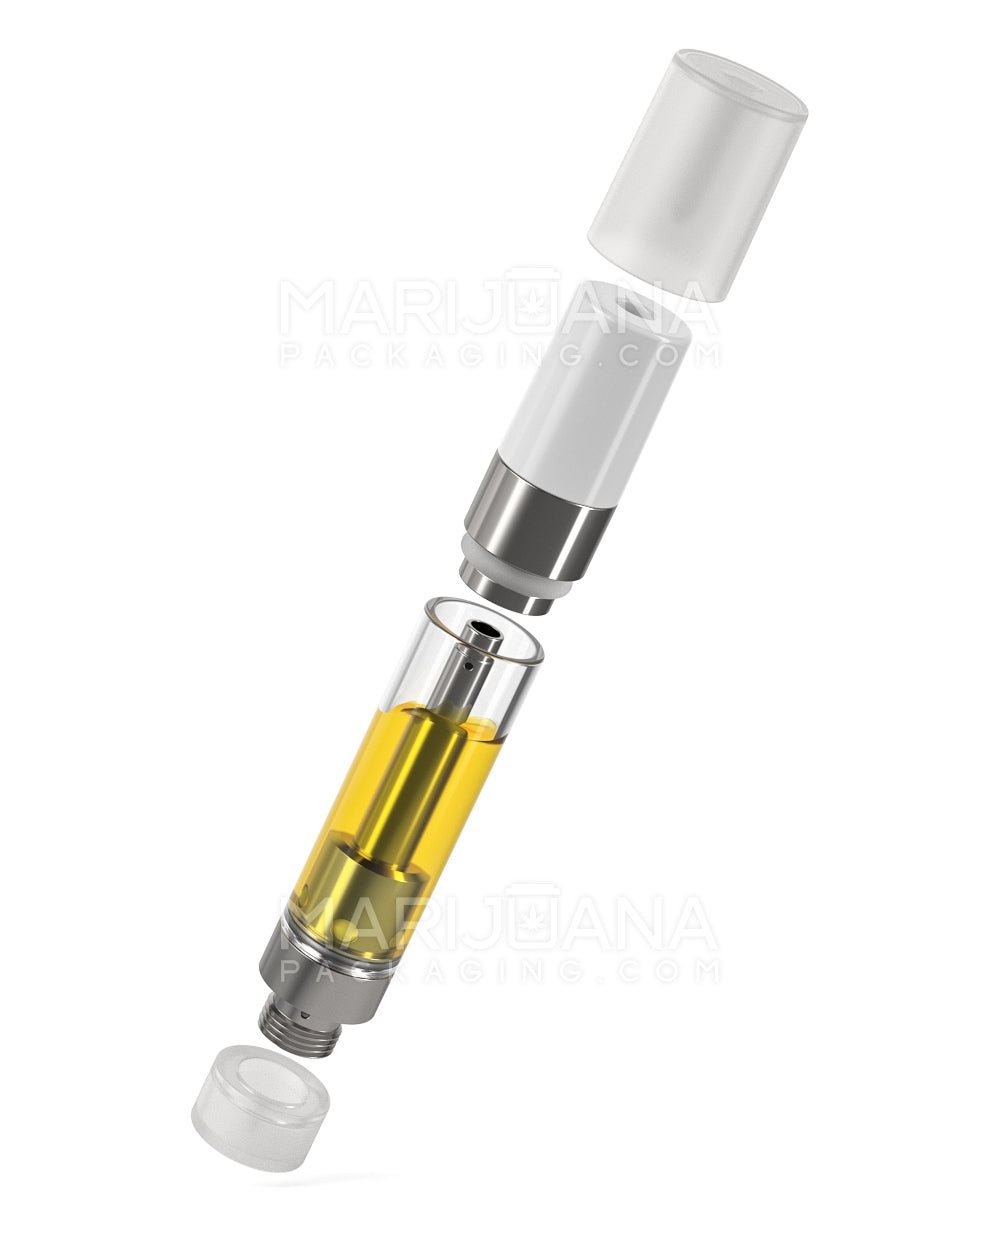 Ceramic Core Glass Vape Cartridge with Round White Plastic Mouthpiece | 1mL - Press On - 100 Count - 8